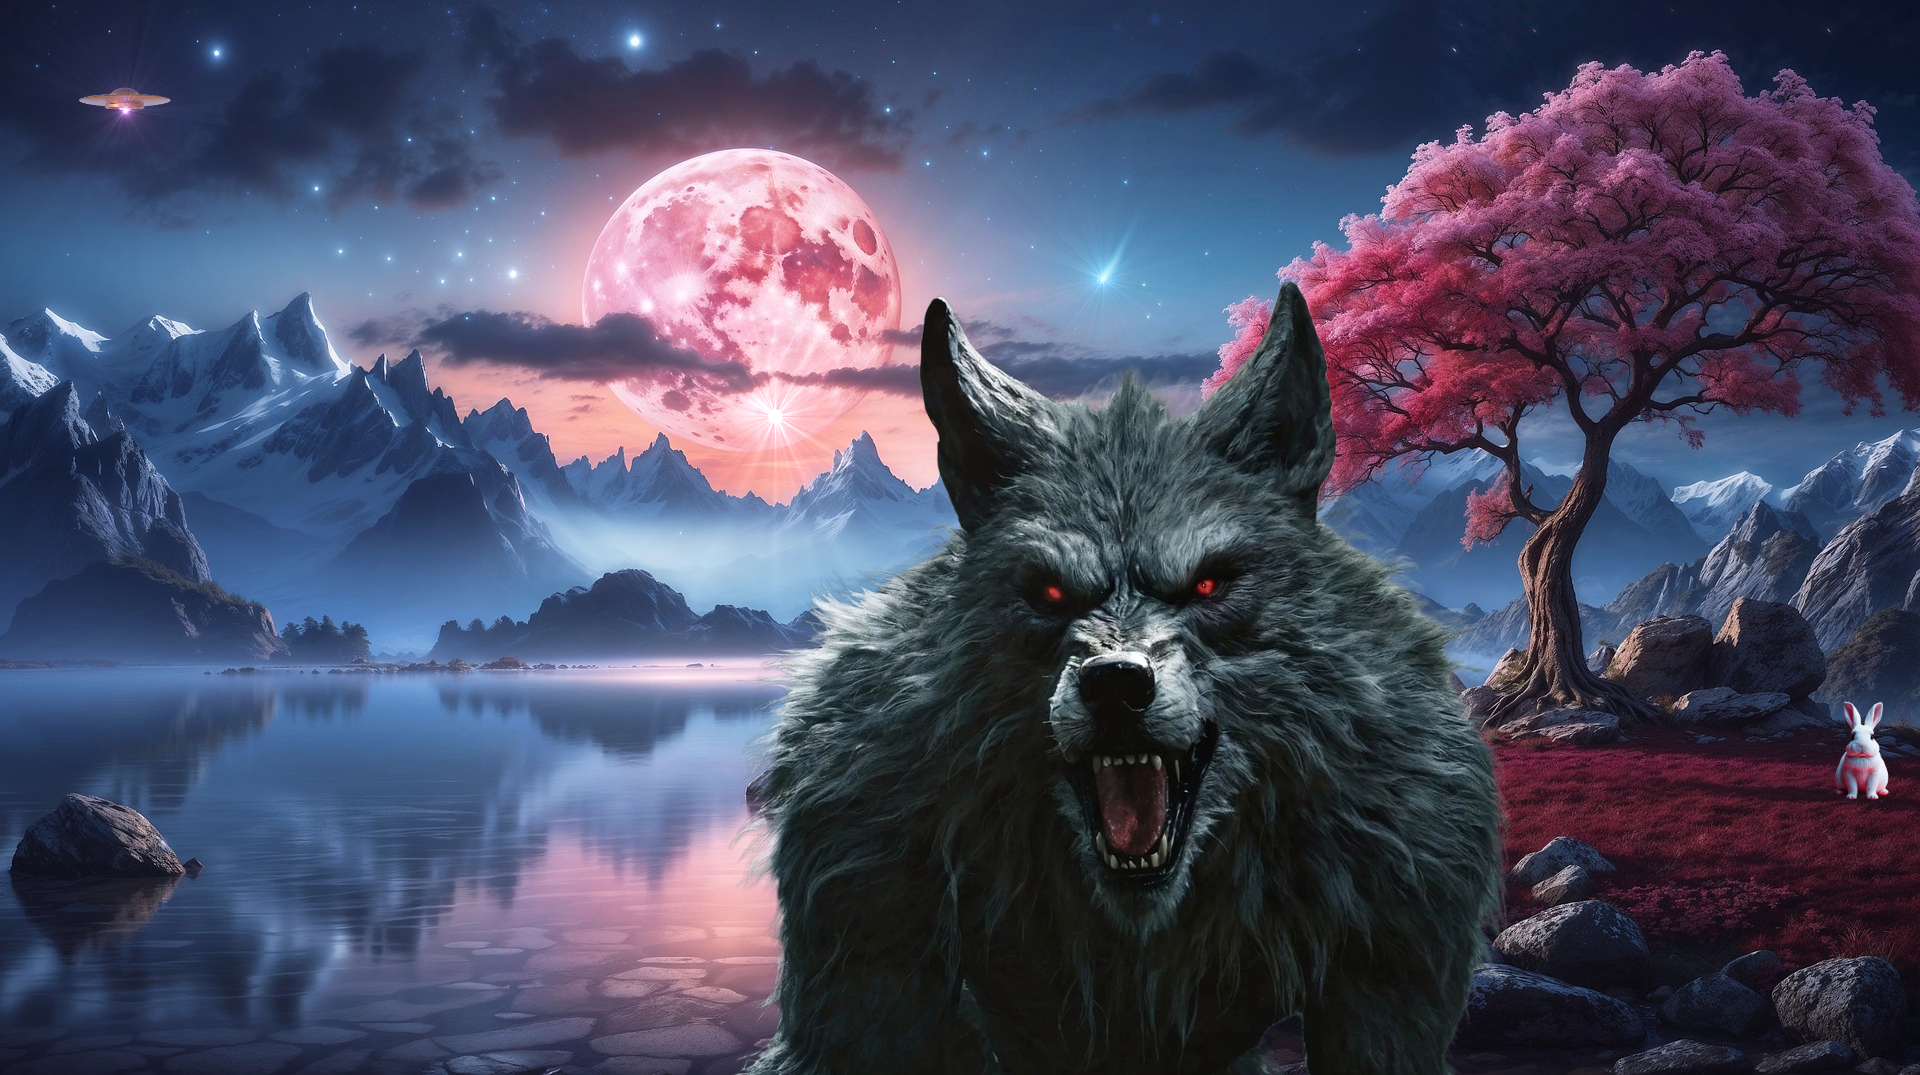 Werewolf under the Pink Moon on the prowl for flesh and blood. The Easter Bunny looks on in shock under a blooming cherry tree as an alien UFO observes the spectacle.